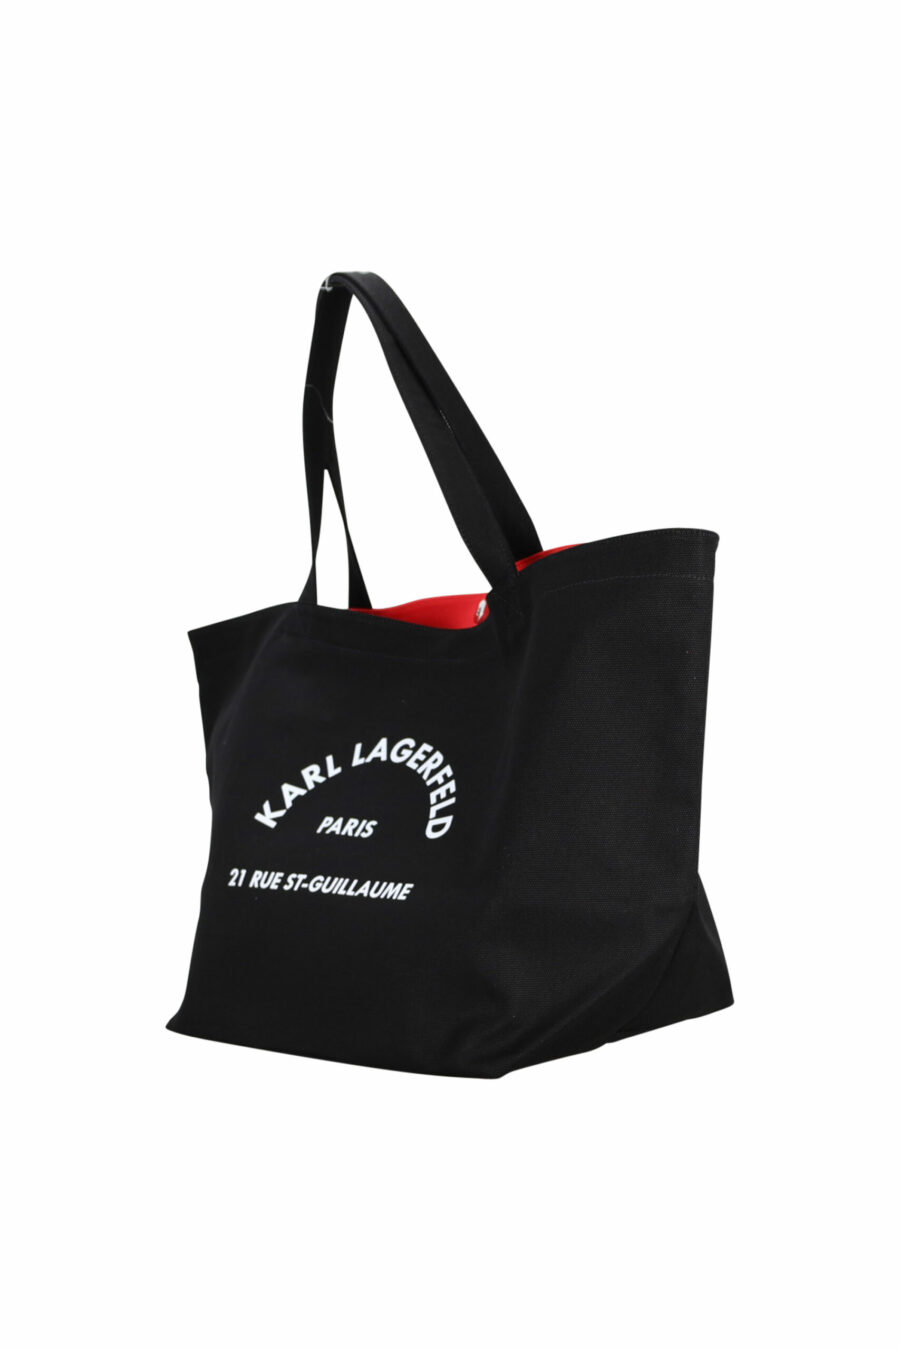 Black tote bag with maxilogo "rue st guillaume" - 8720092106603 1 scaled